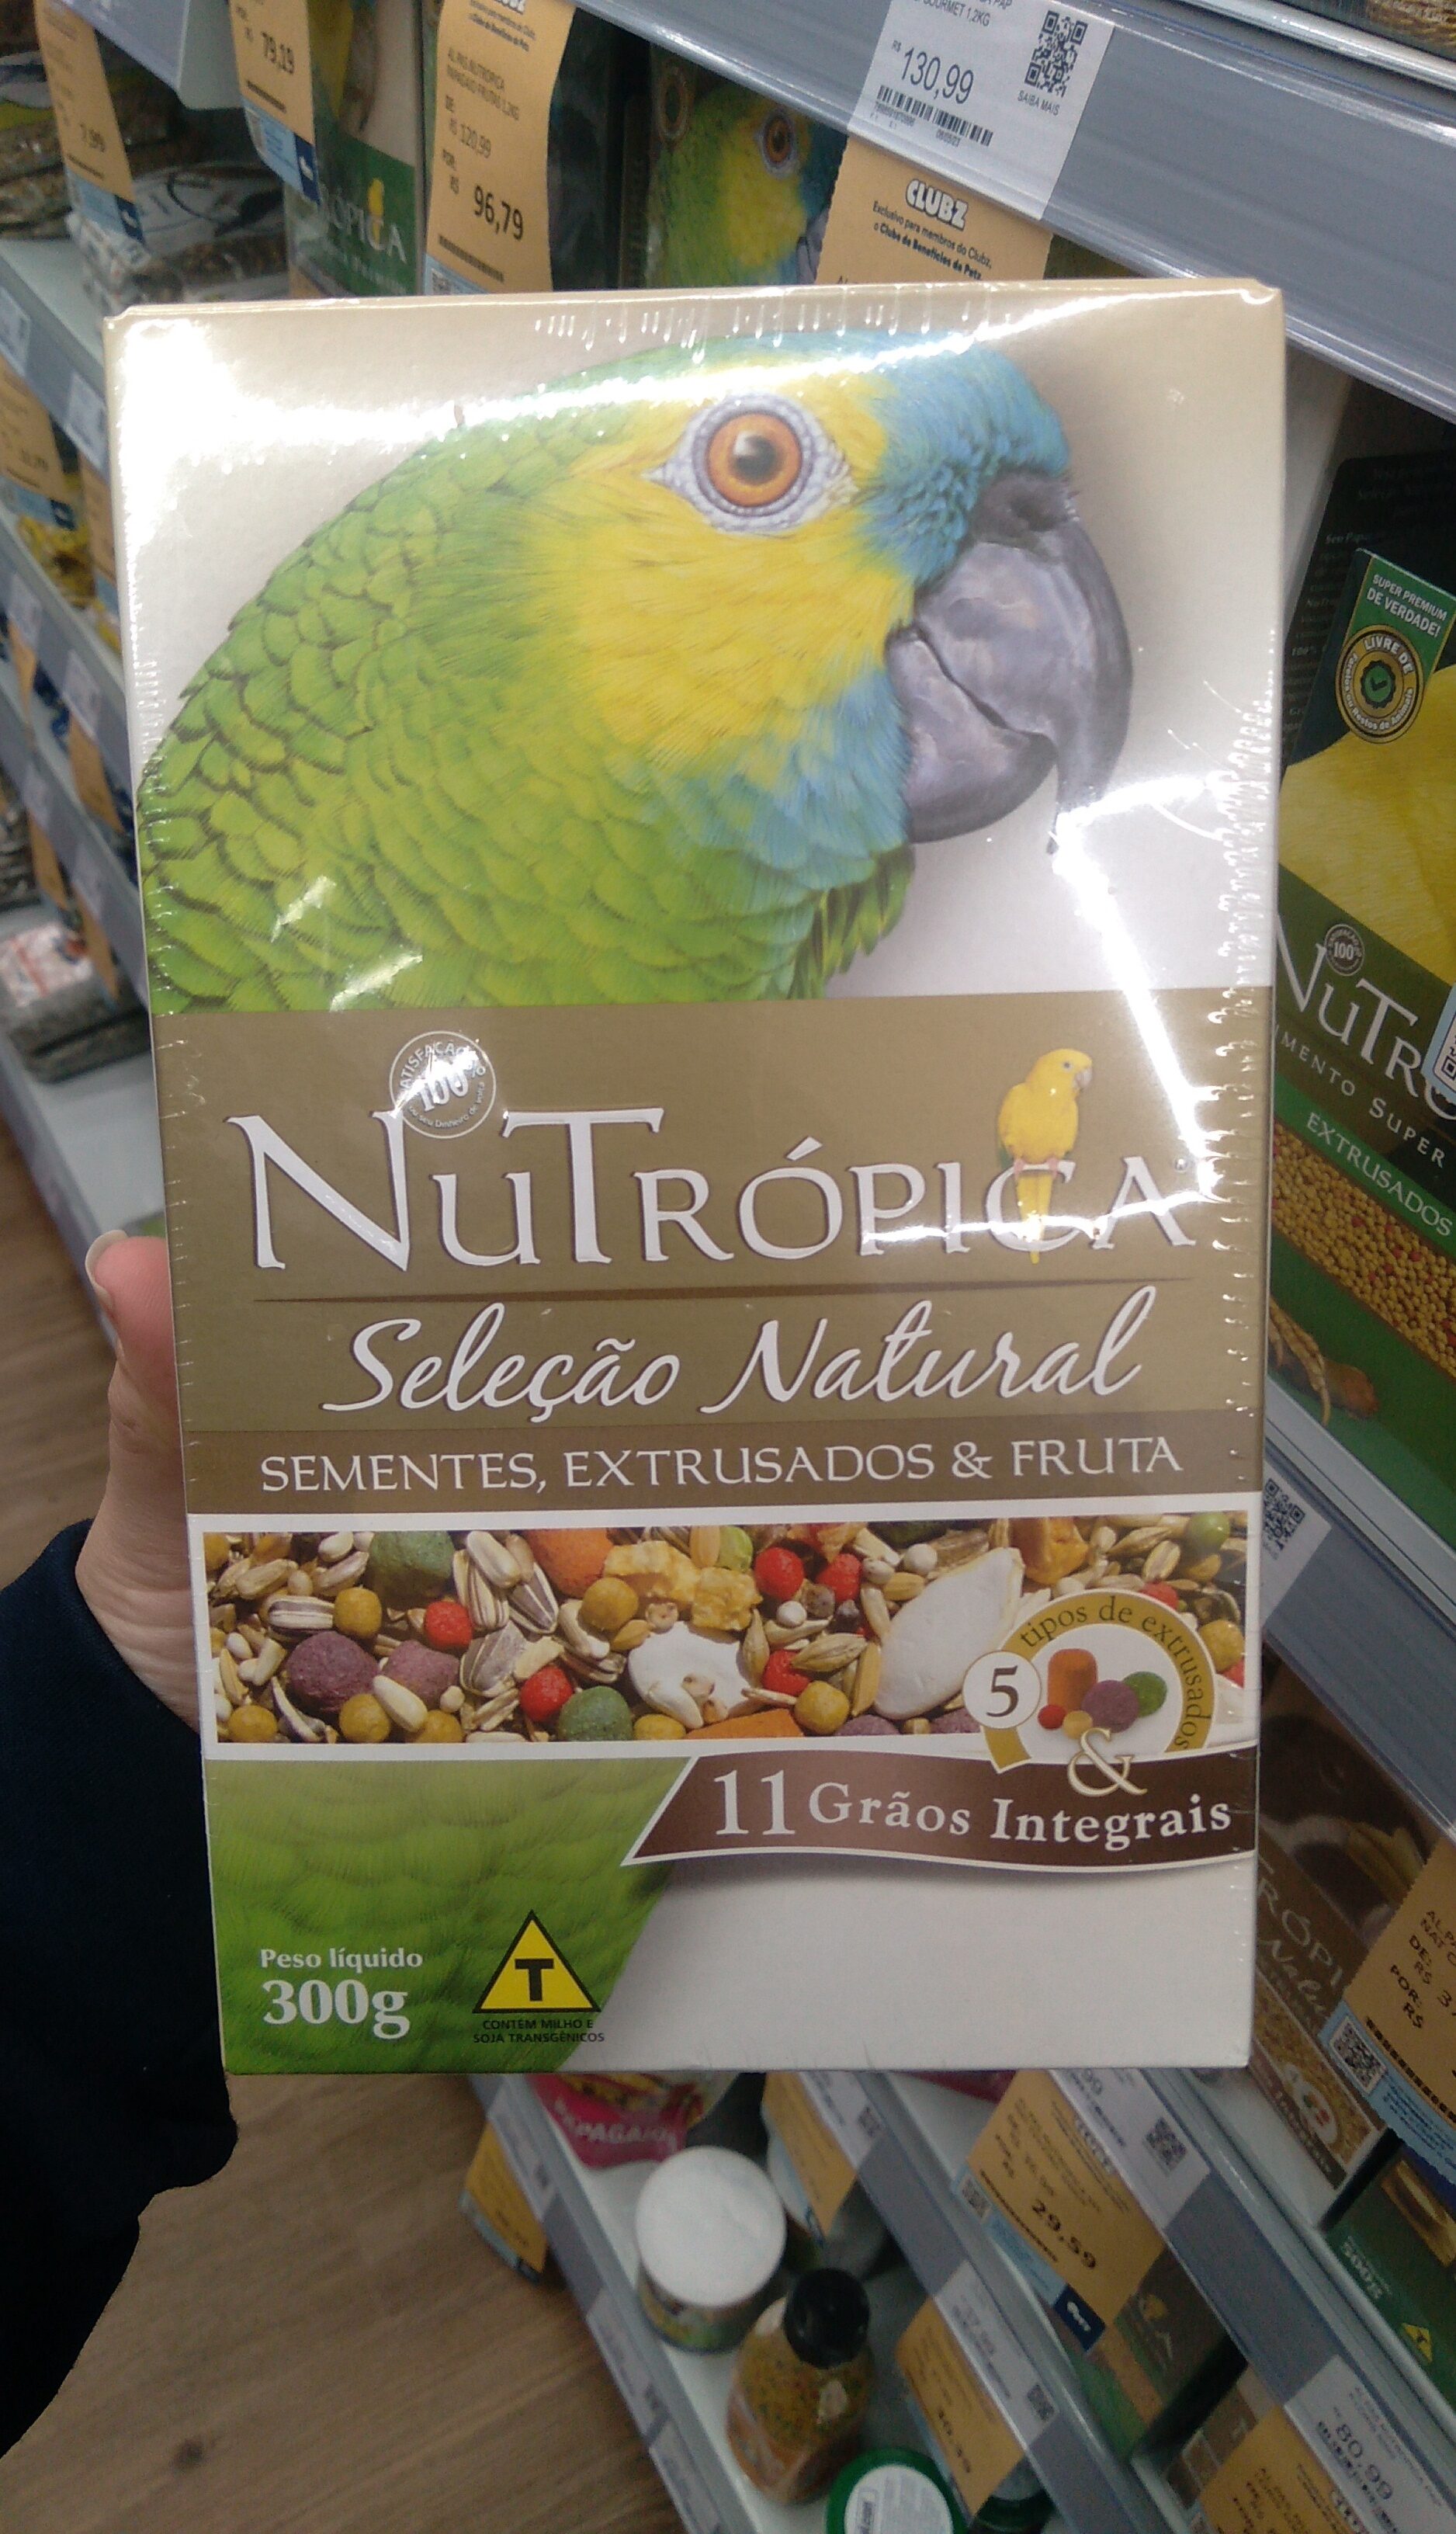 Nutropica Sel. Natural 300g - Product - pt